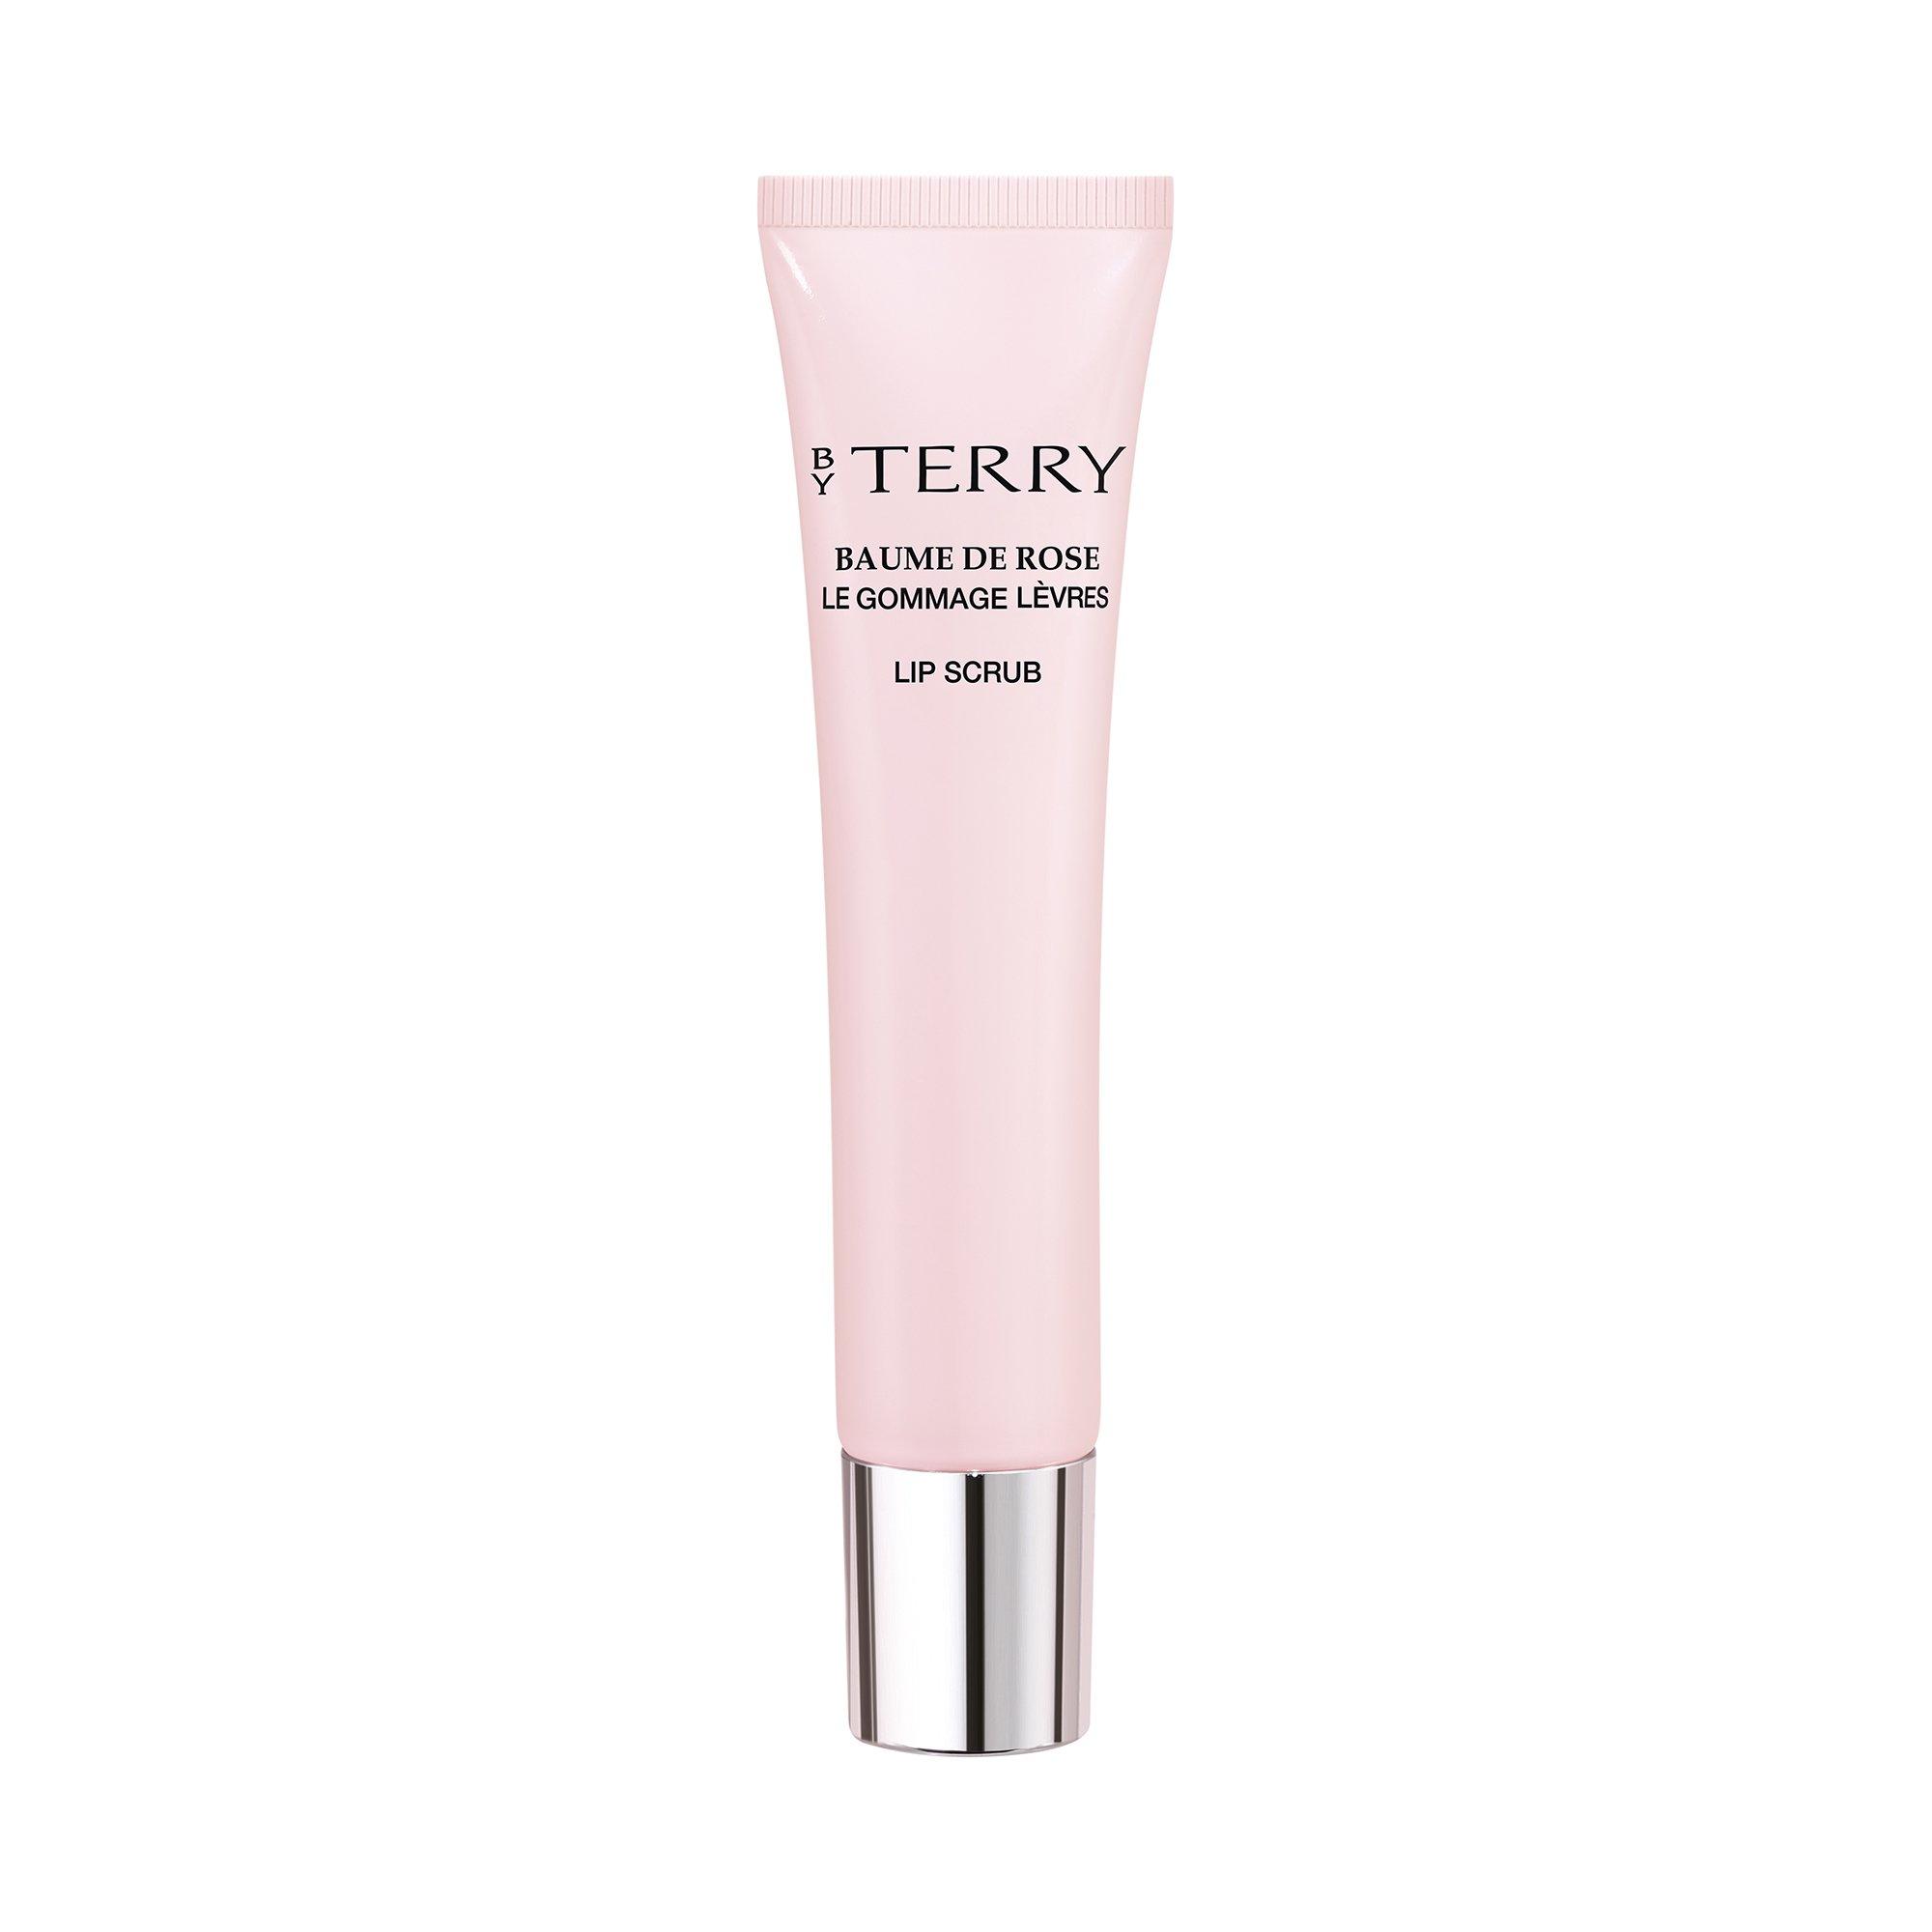 Image of BY TERRY Baume De Rose Le Gommage Levres - 15g